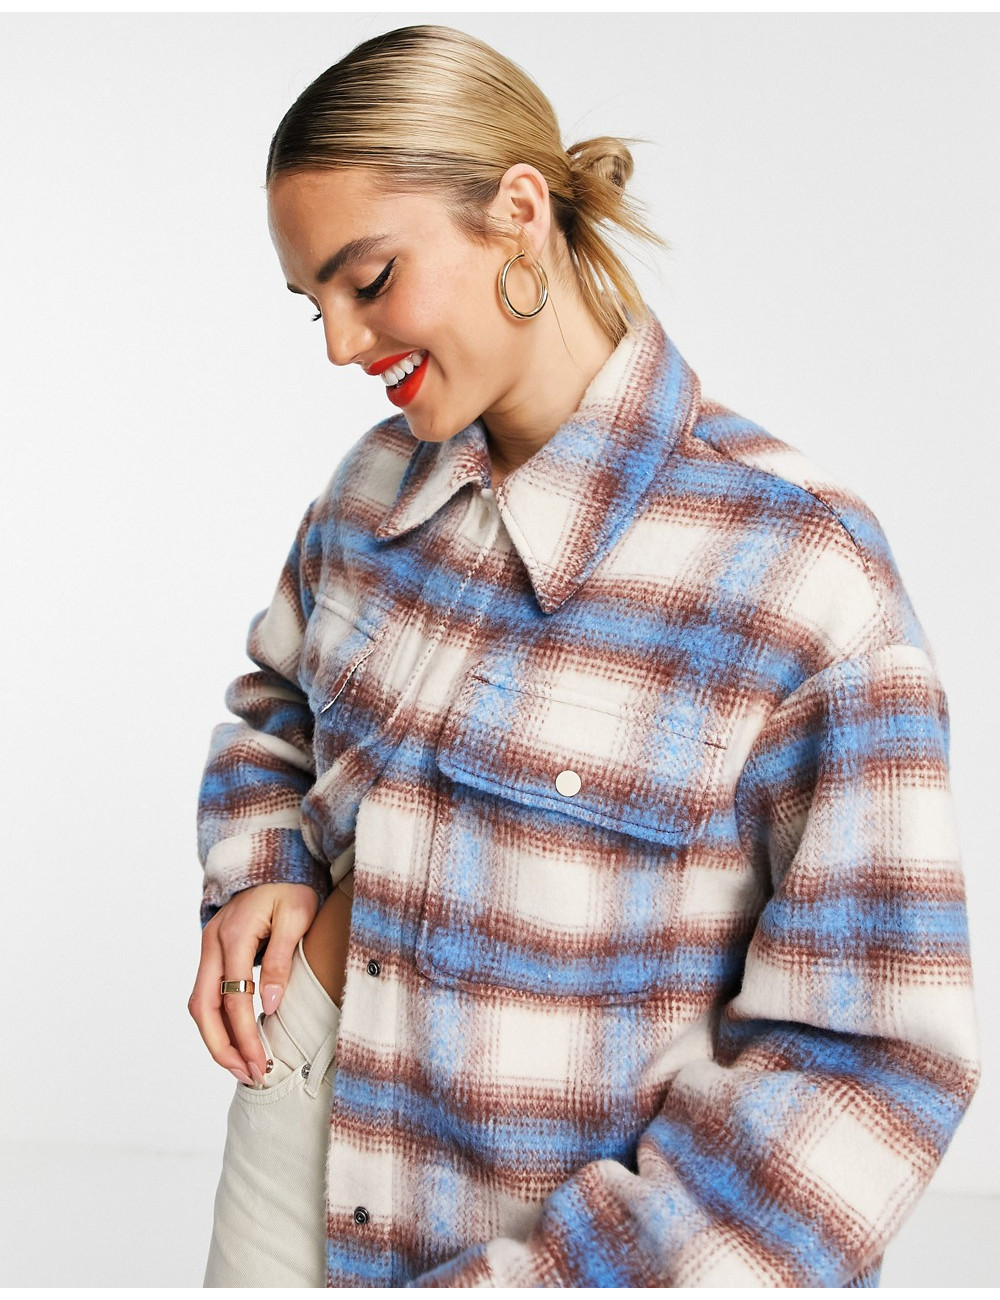 Levi's long shacket in plaid